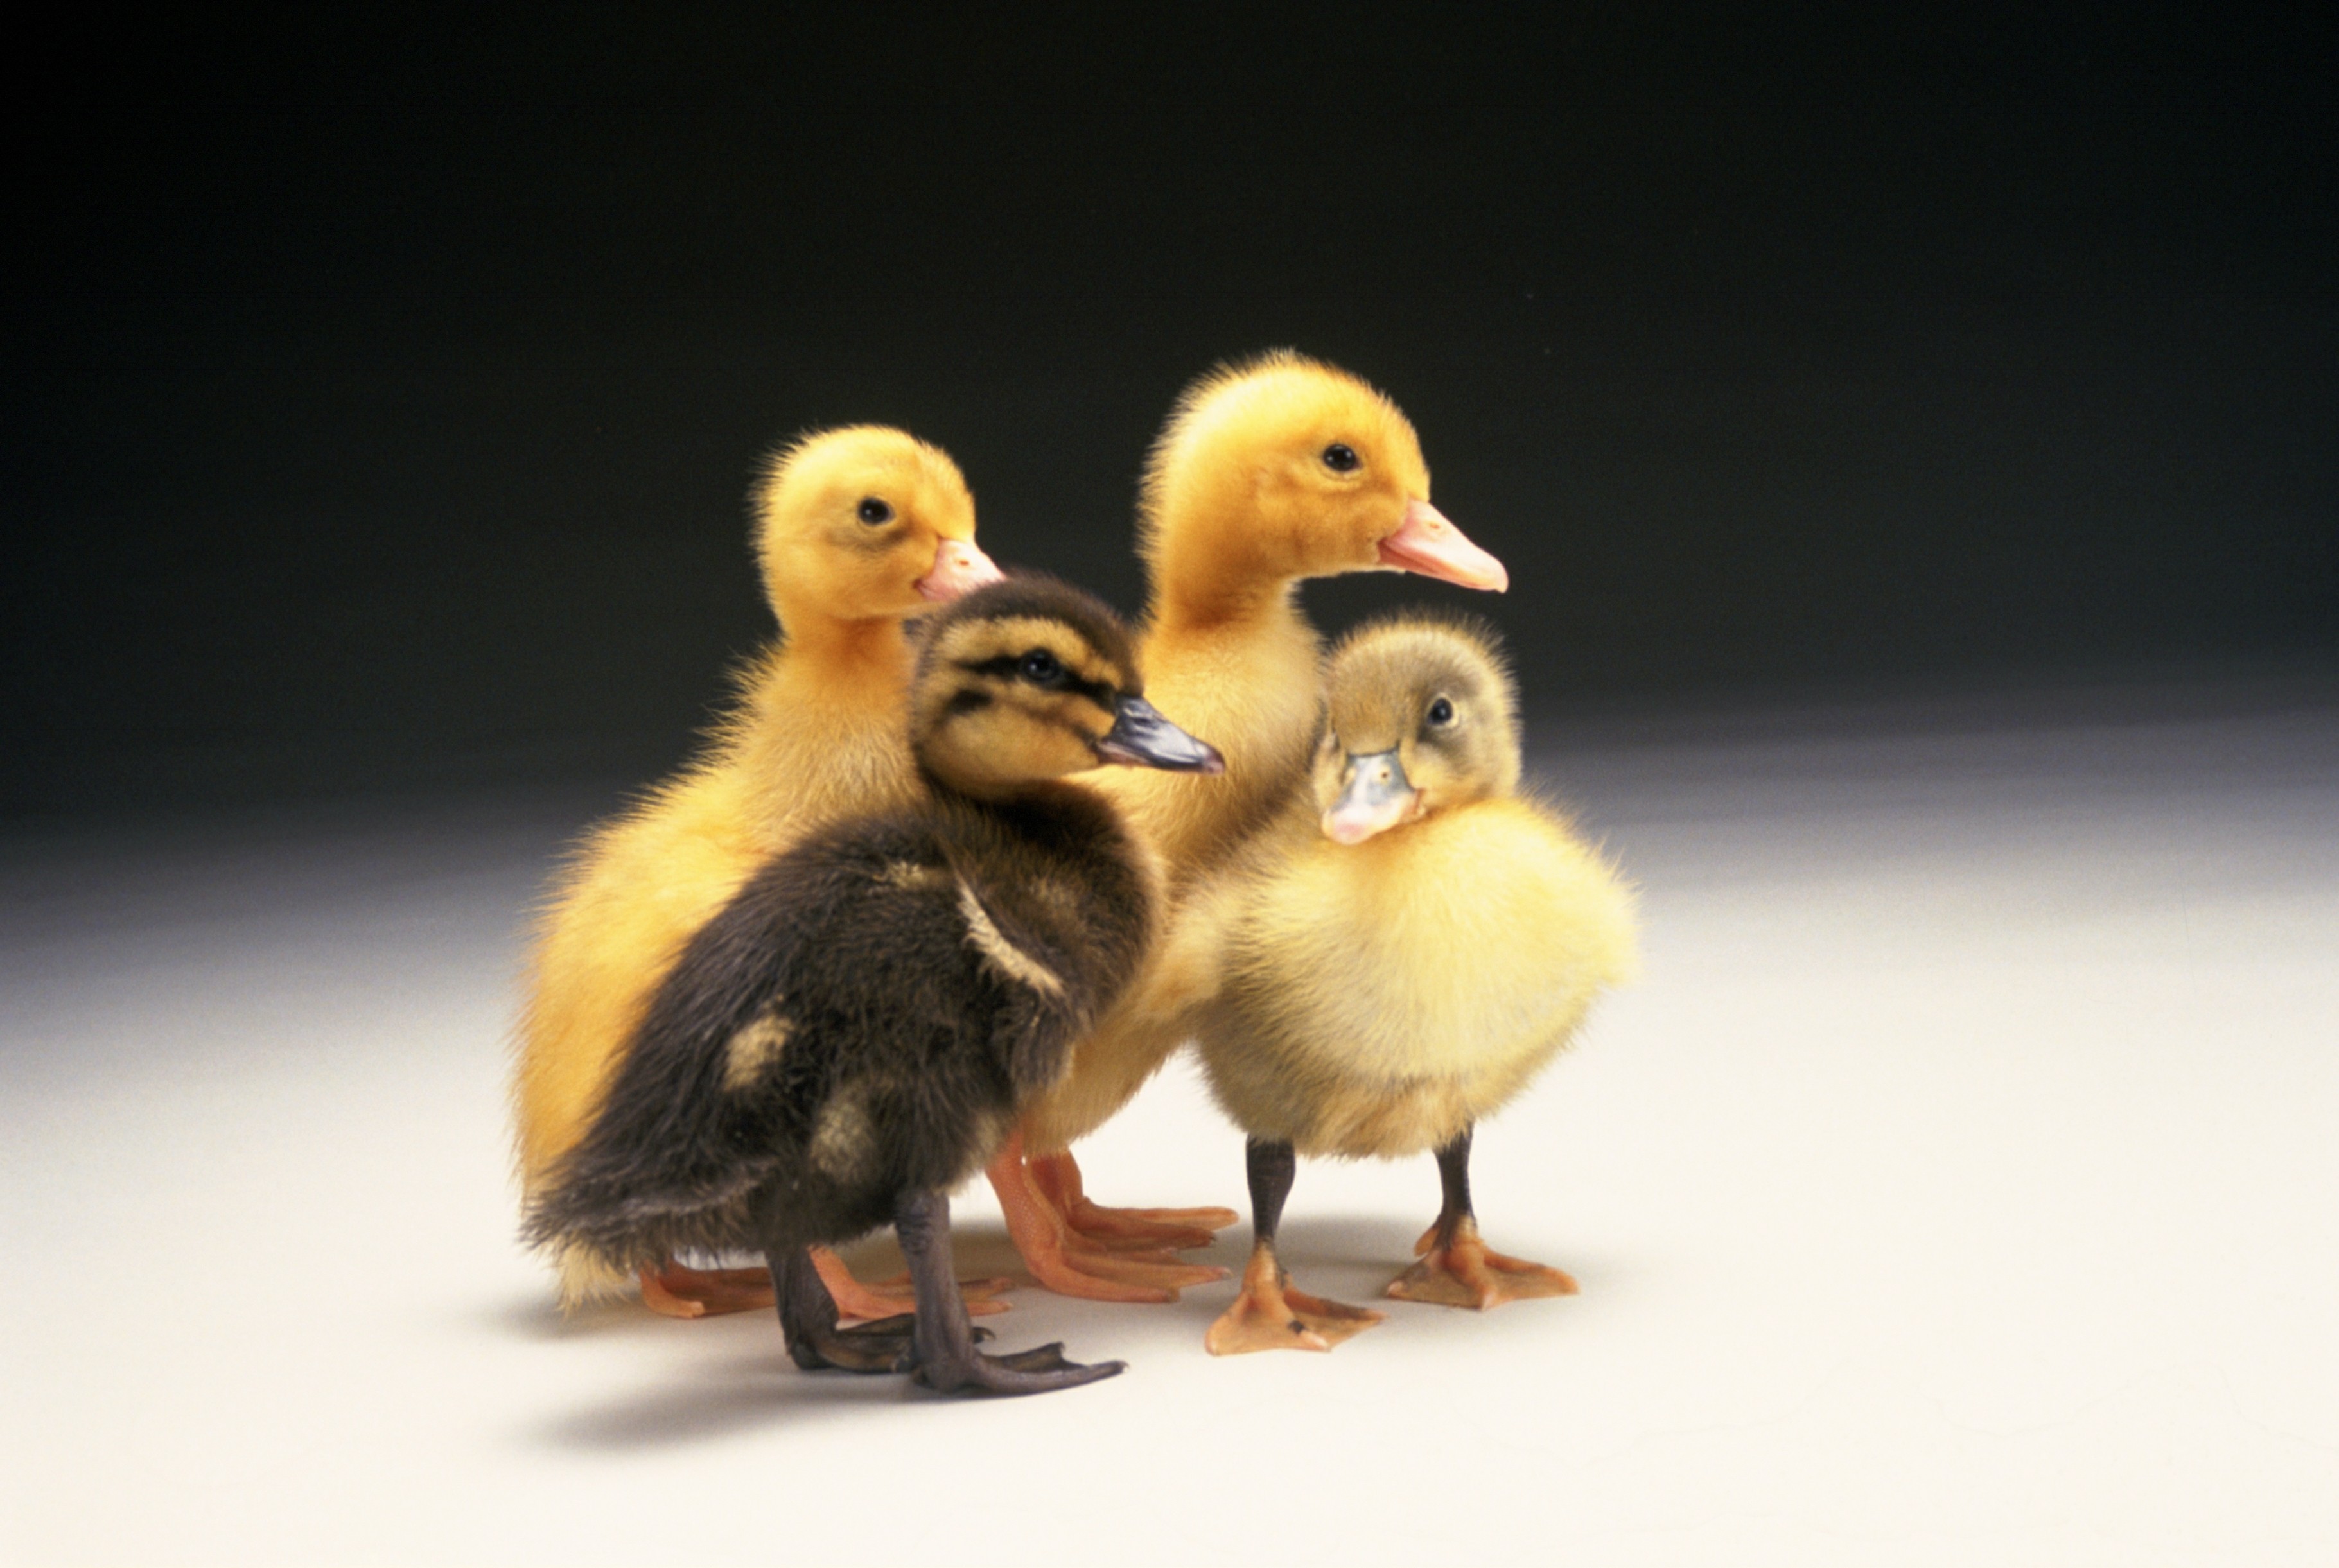 Mixed Ducklings